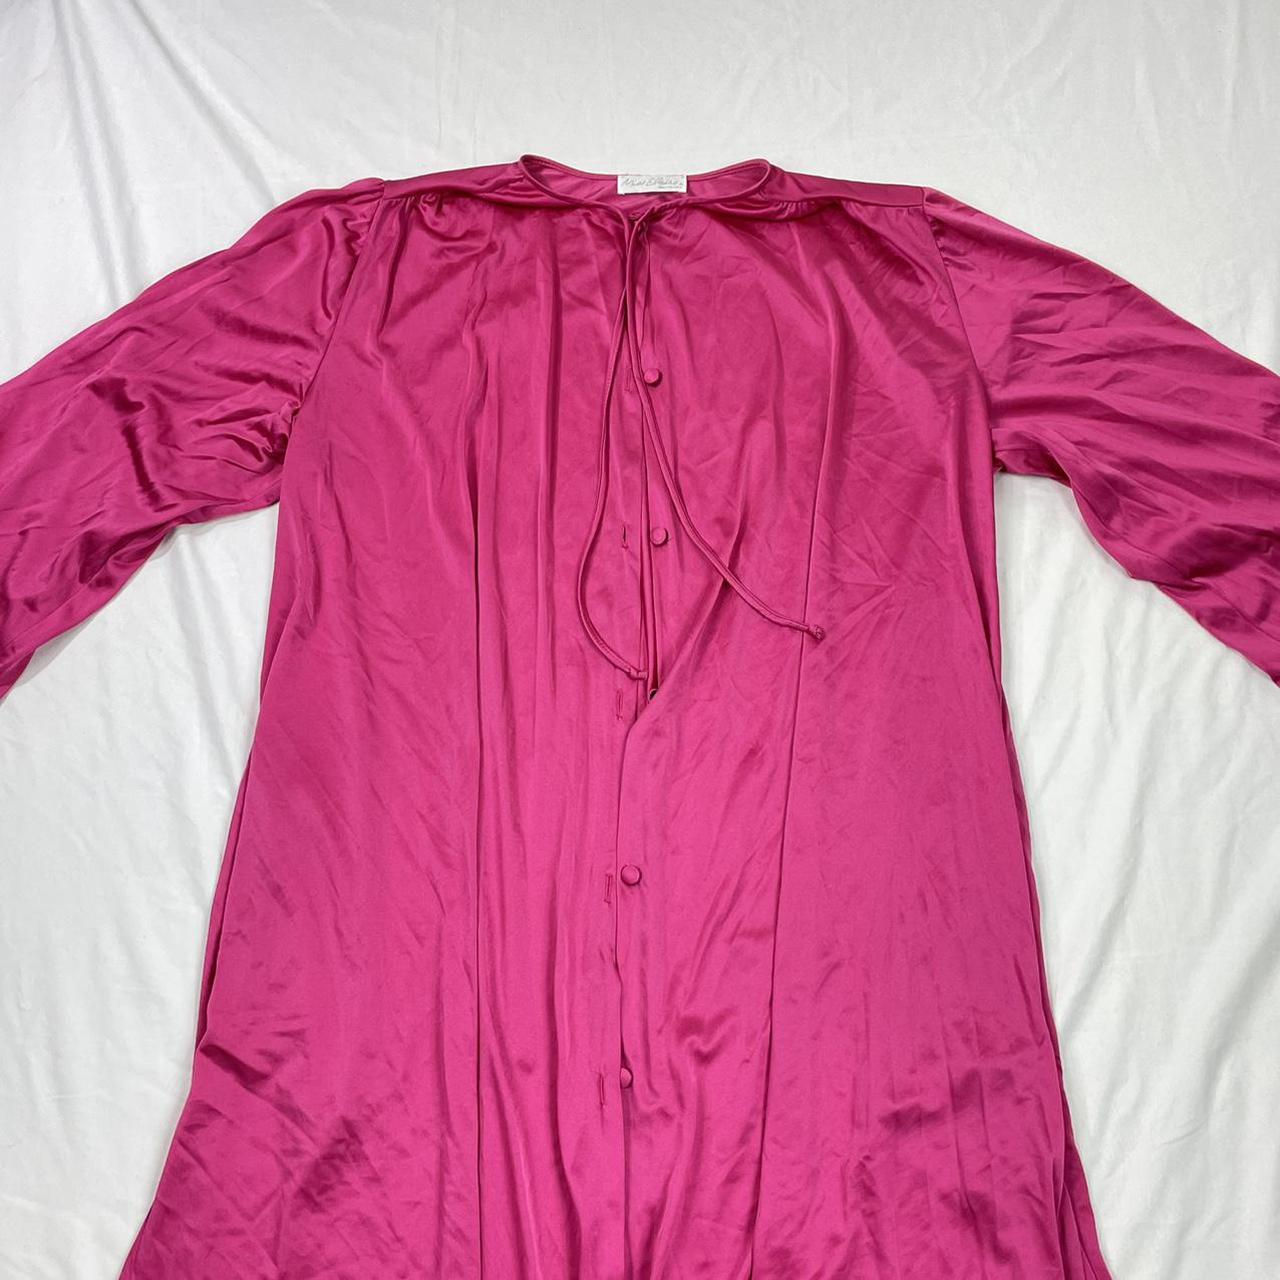 Product Image 3 - vintage silky robe

light and flowy,